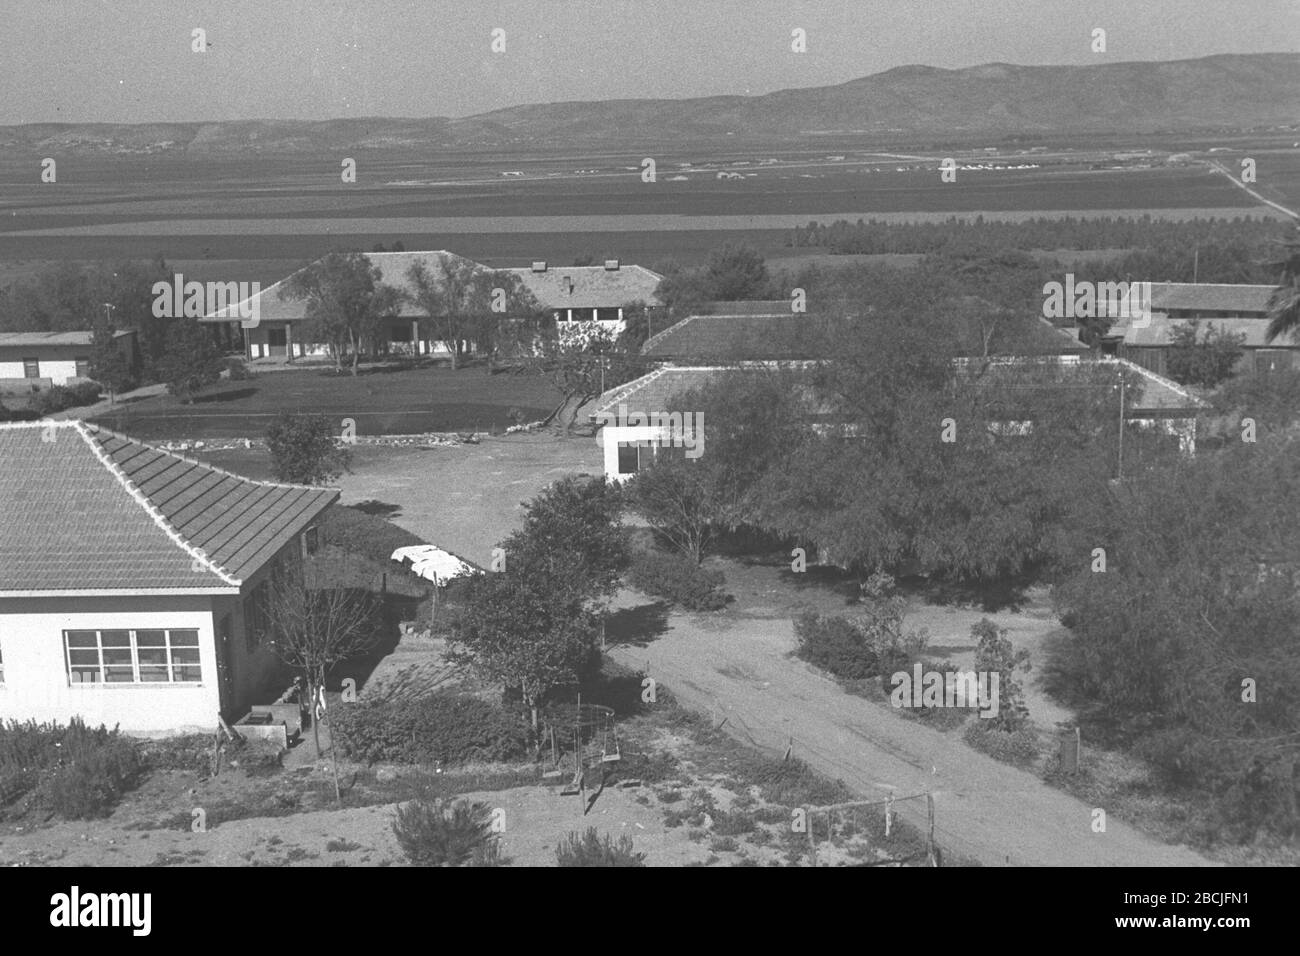 English Kibbutz Sarid In The Jezreel Valley Ss O E I C O I E U Ss O N E U 01 04 1944 This Is Available From National Photo Collection Of Israel Photography Dept Goverment Press Office Link Under The Digital Id